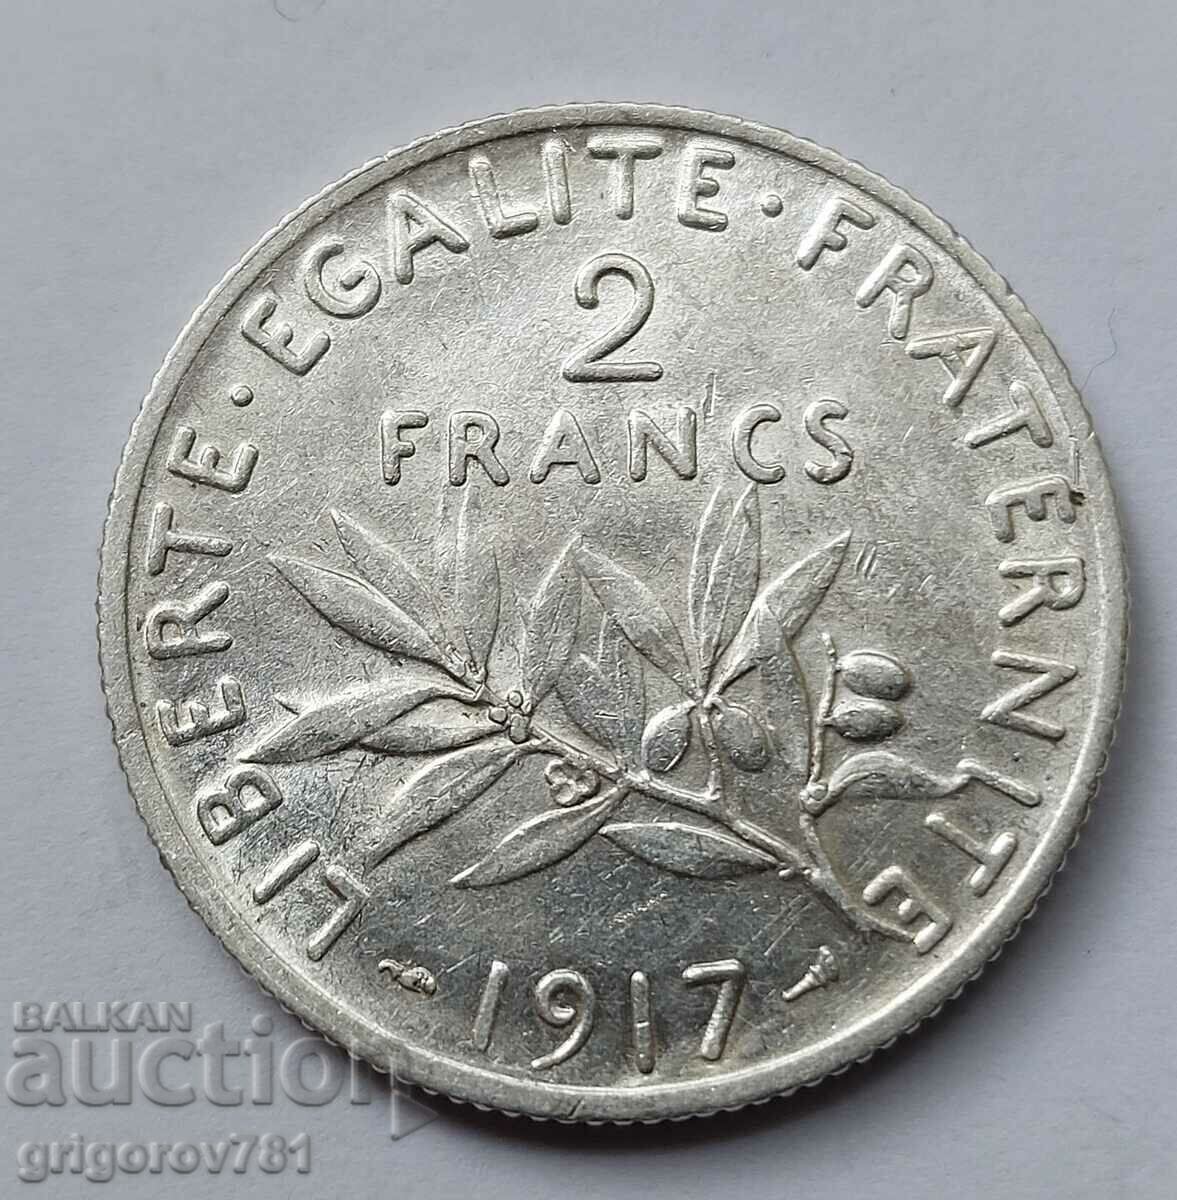 2 Francs Silver France 1917 - Silver Coin #94